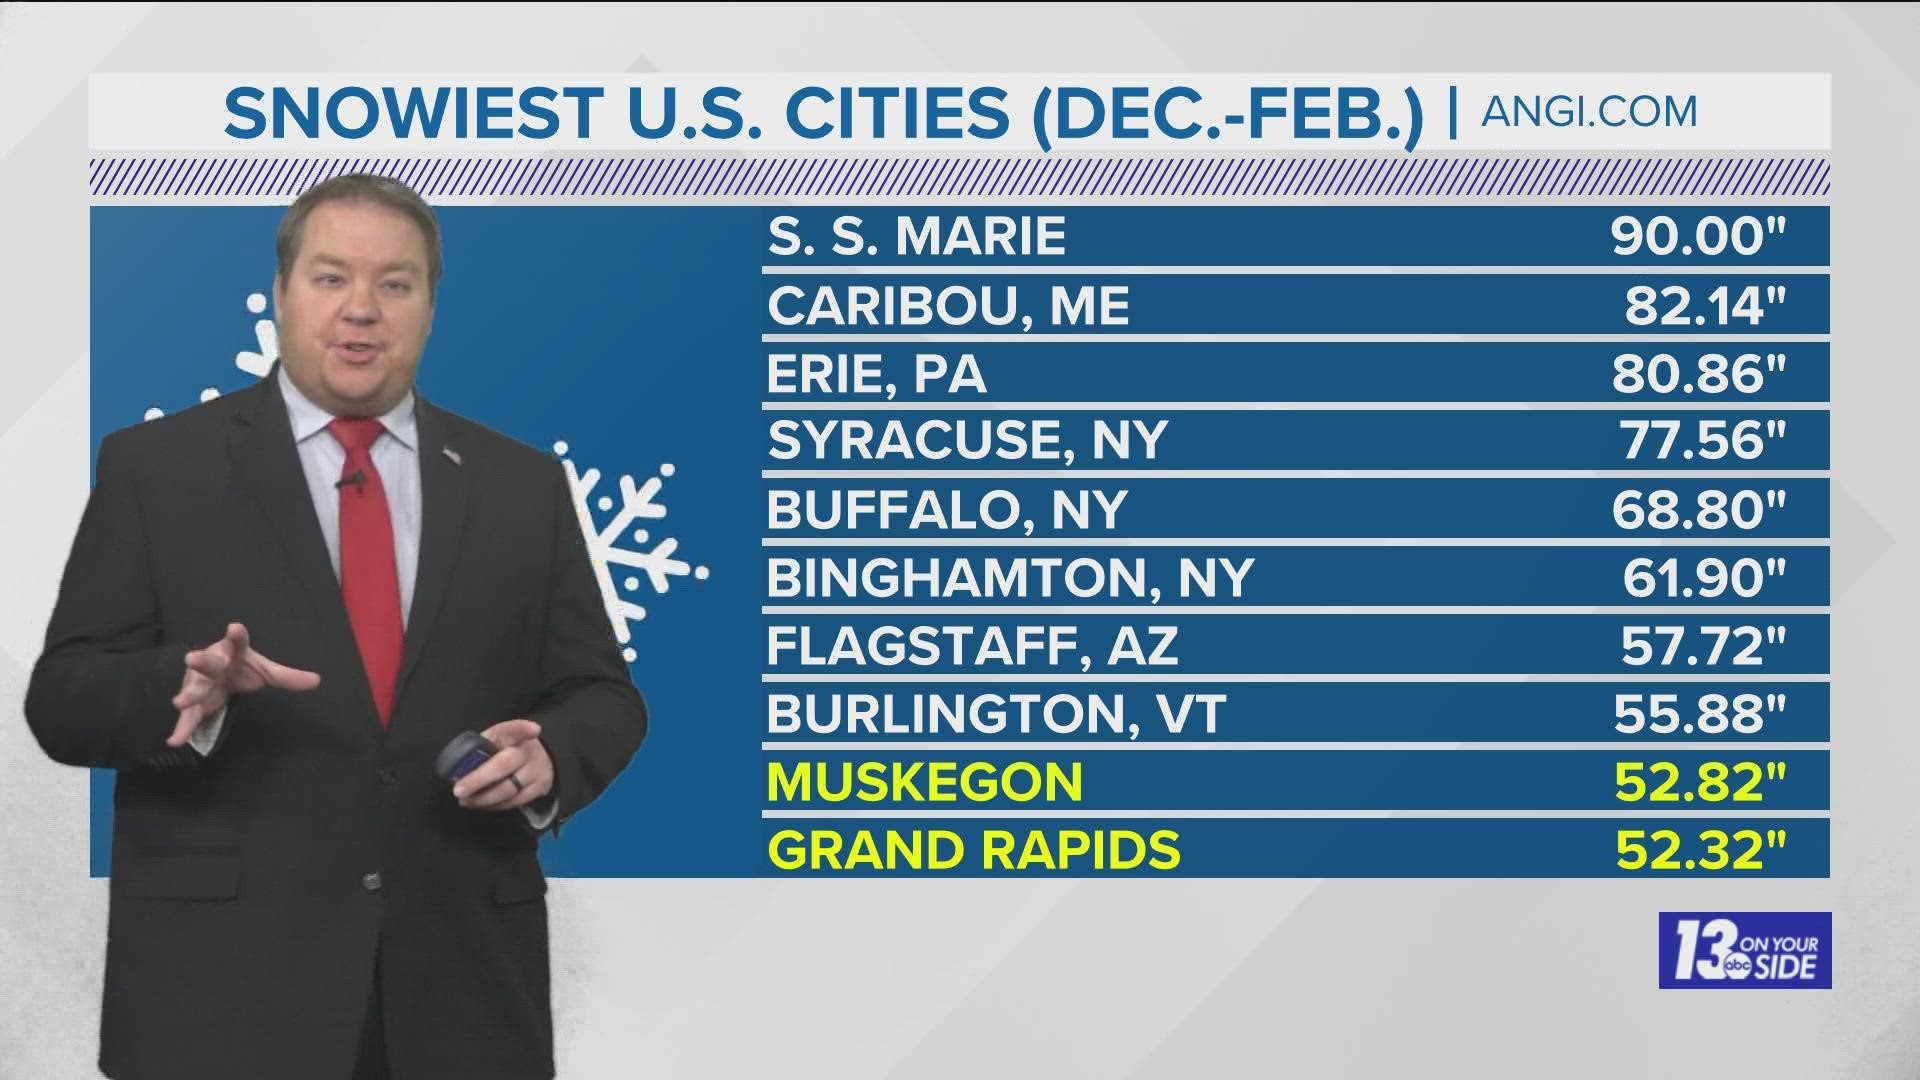 Despite some underperforming winters in West Michigan, several cities made the top 10 snowiest list from Angi.com. Here's a look at the numbers!